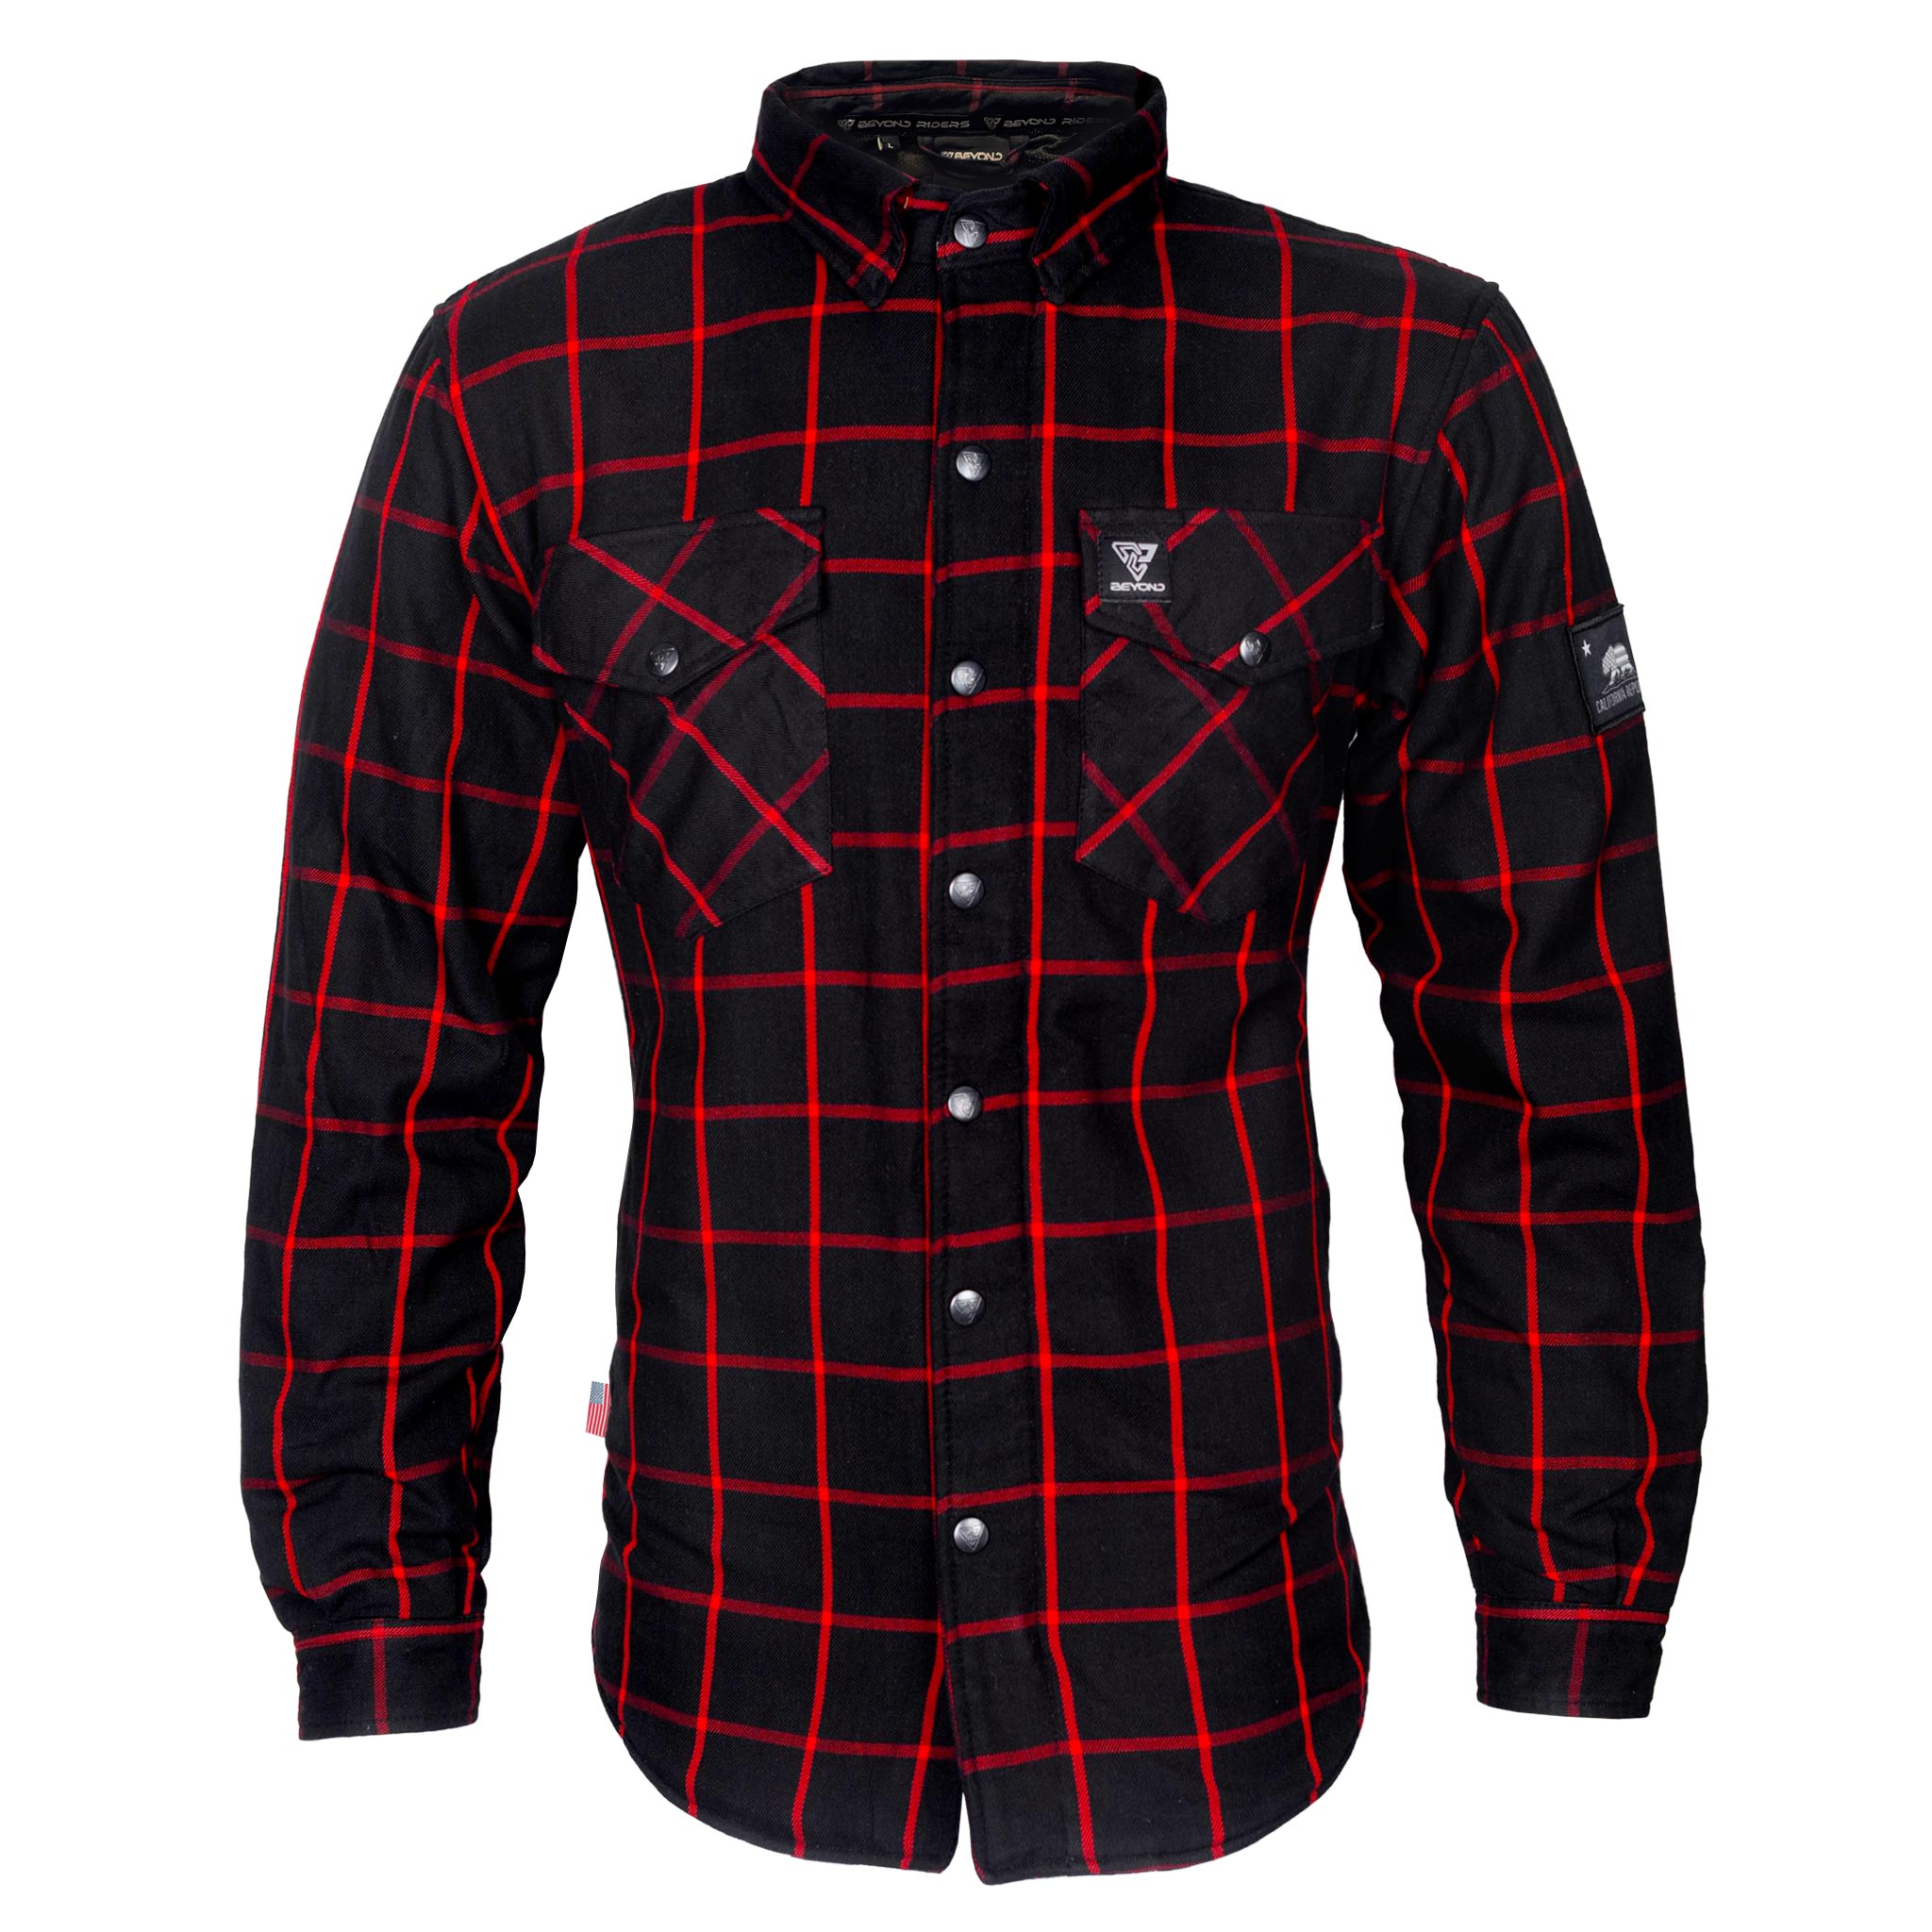 Protective Flannel Shirt "Crimson Lane" - Black and Red Stripes with Pads